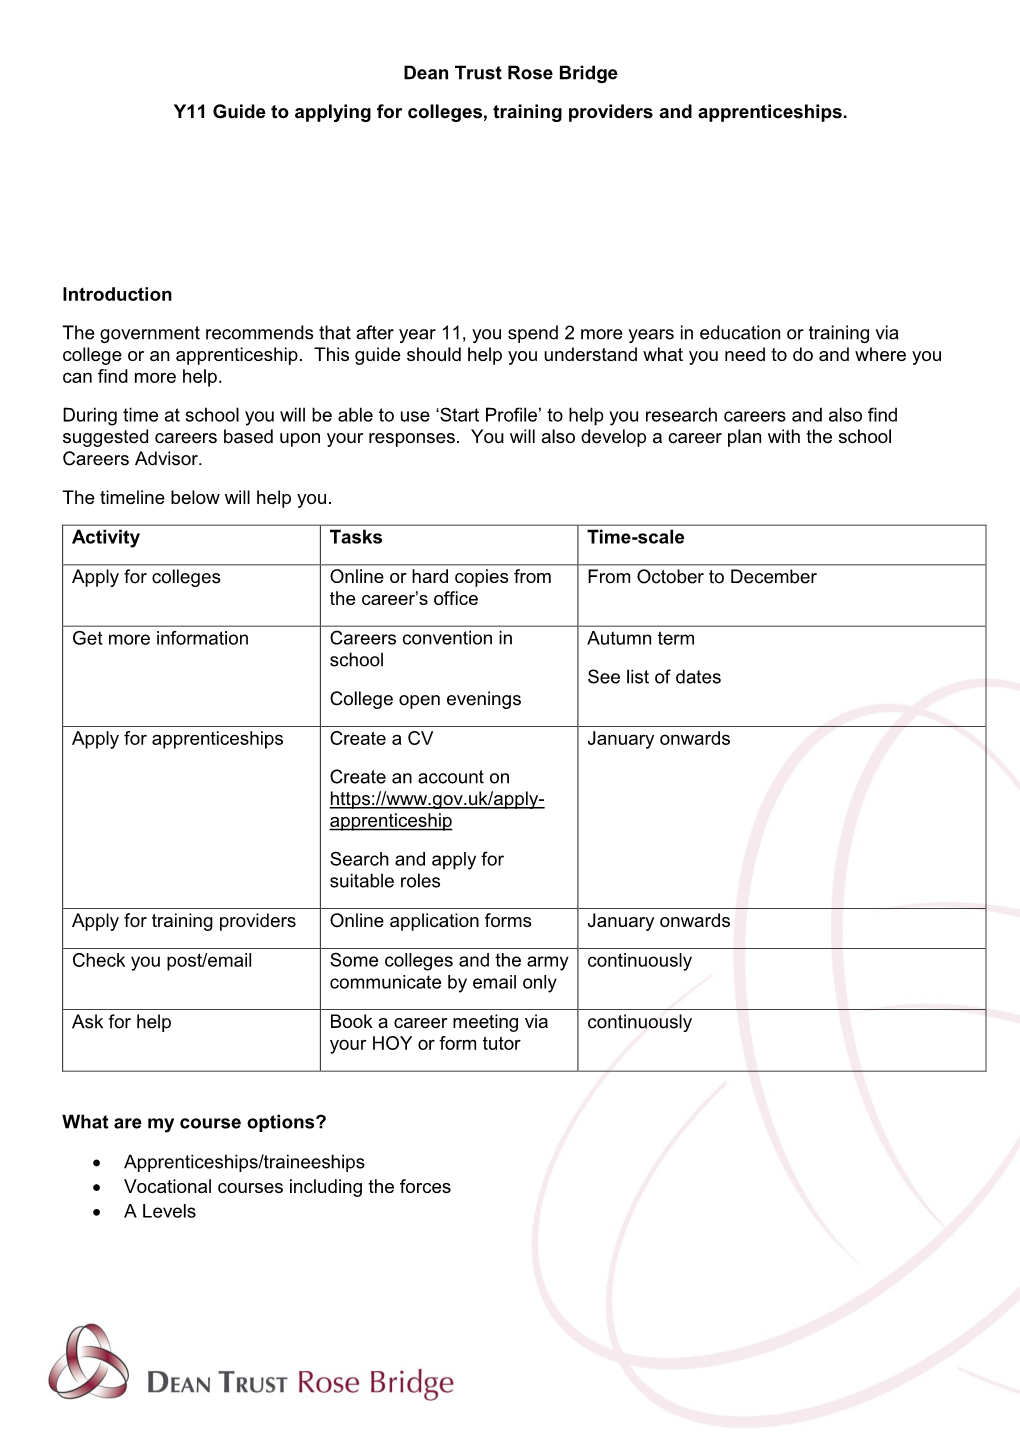 Dean Trust Rose Bridge Y11 Guide to Applying for Colleges, Training